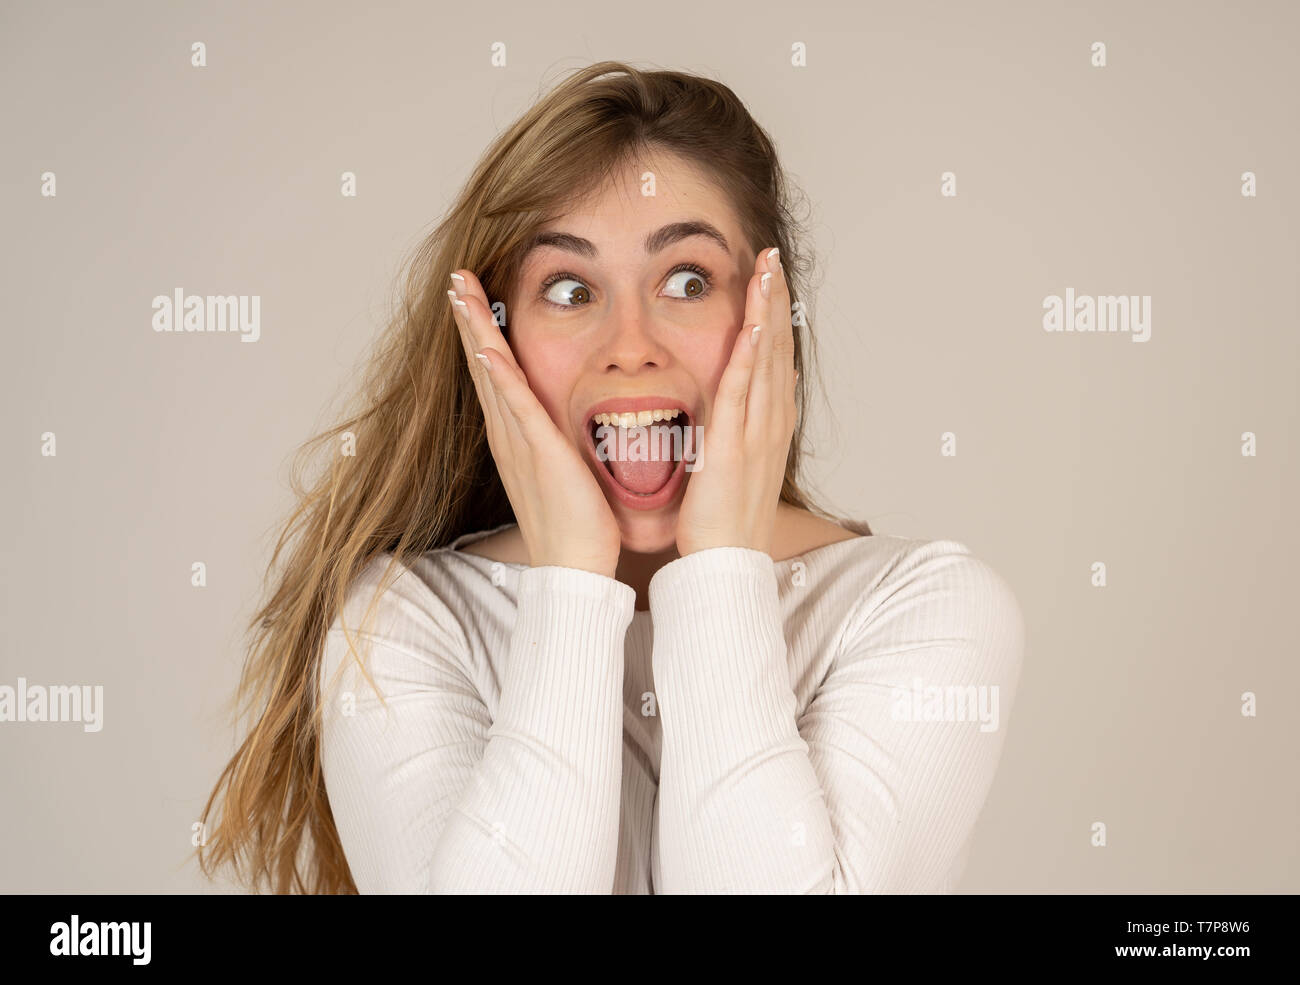 Beautiful young blonde teenager woman with happy face making surprised gestures looking and pointing at something shocking and good. Human facial expr Stock Photo